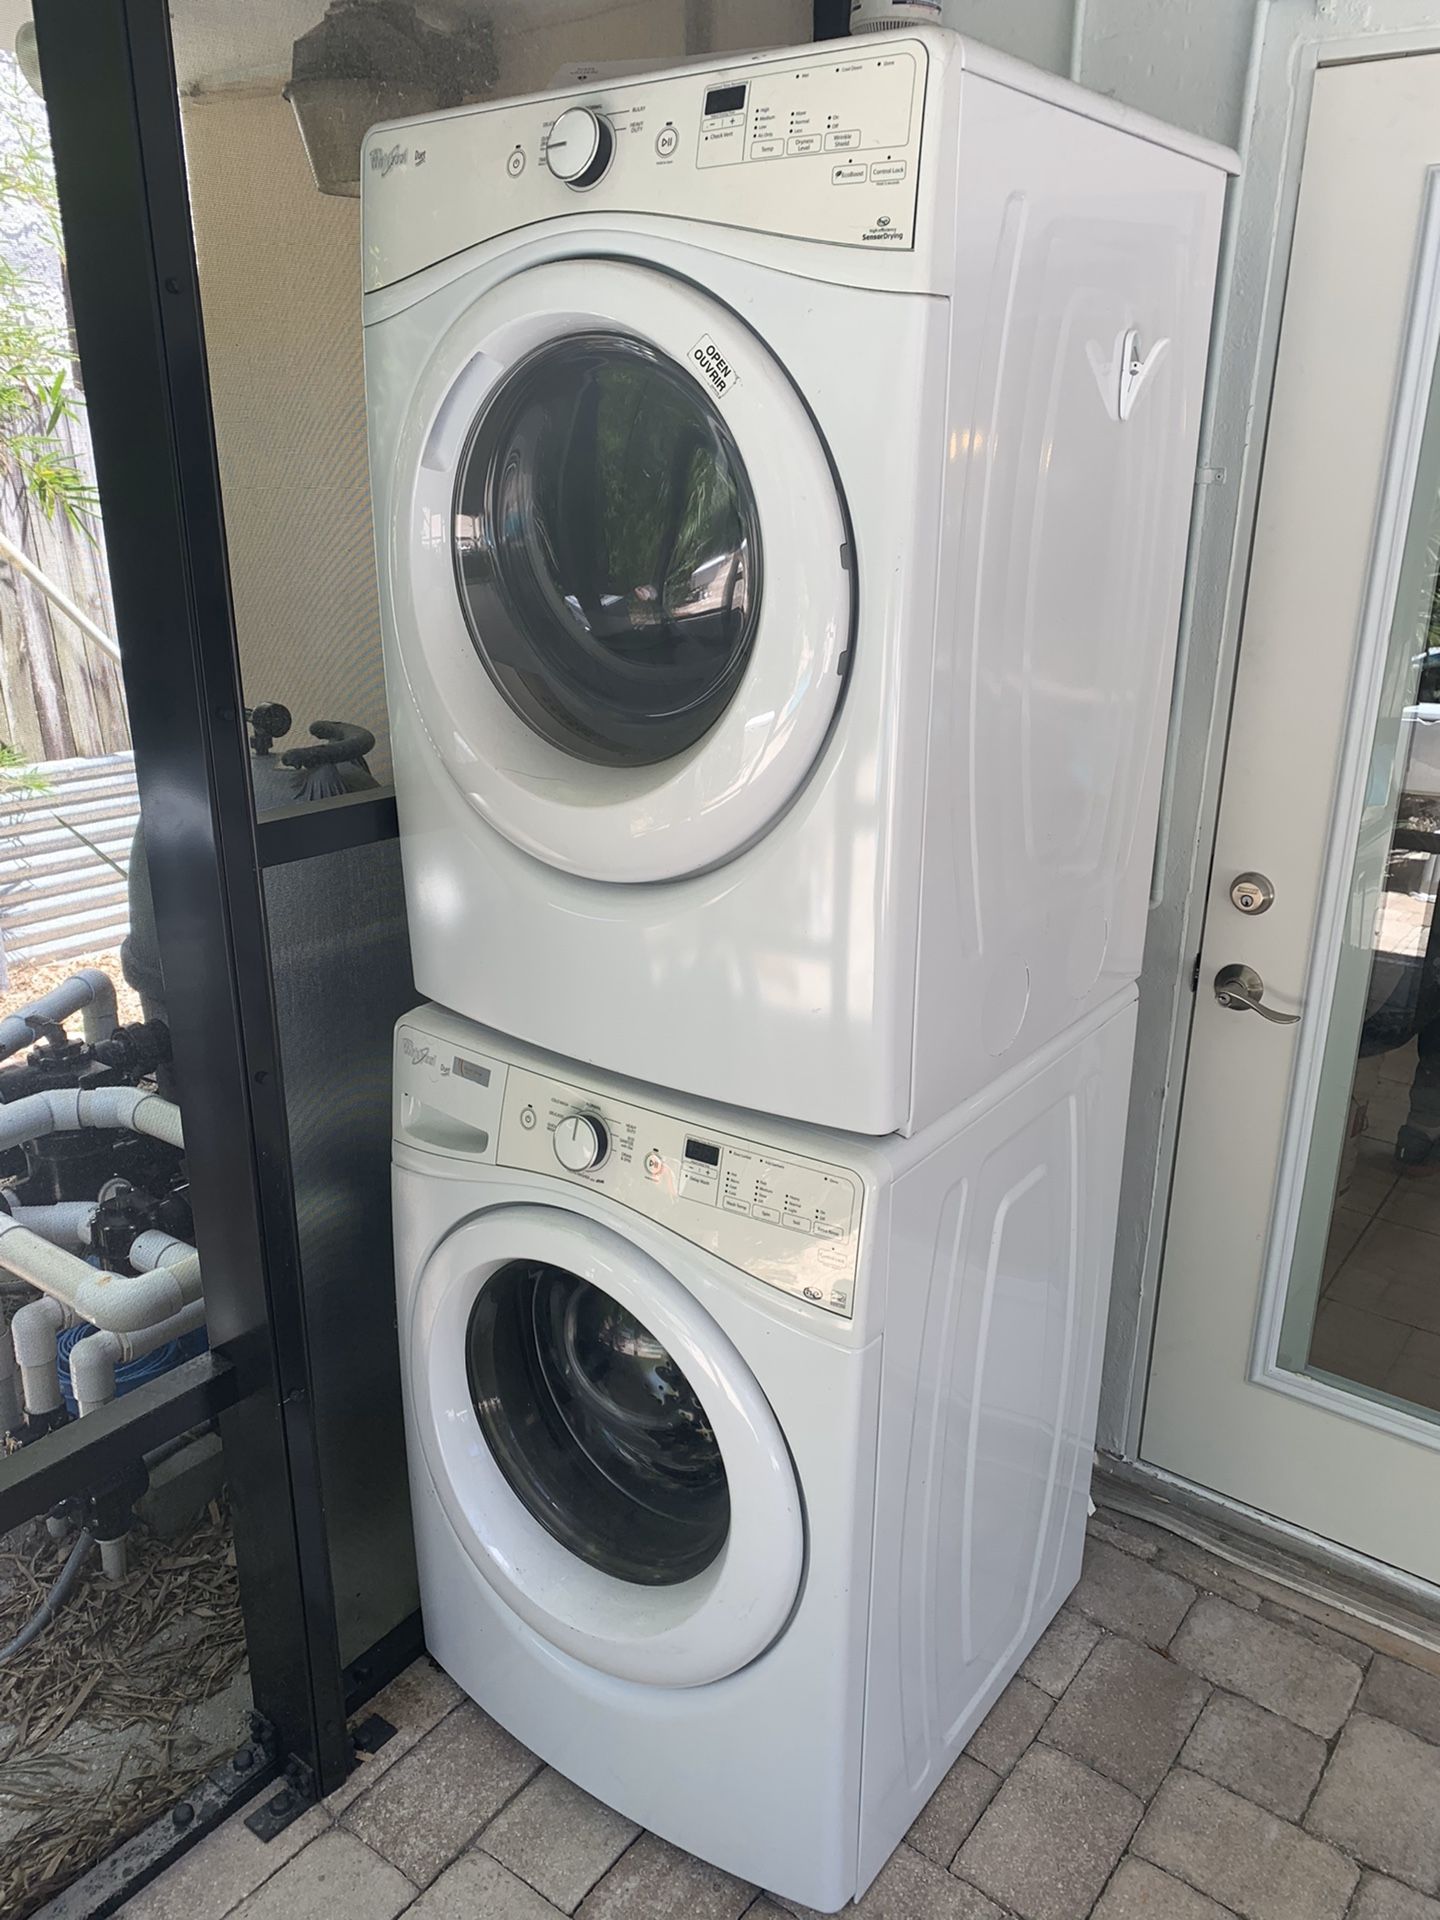 SELLING NOW - Whirlpool Washer / Dryer Set